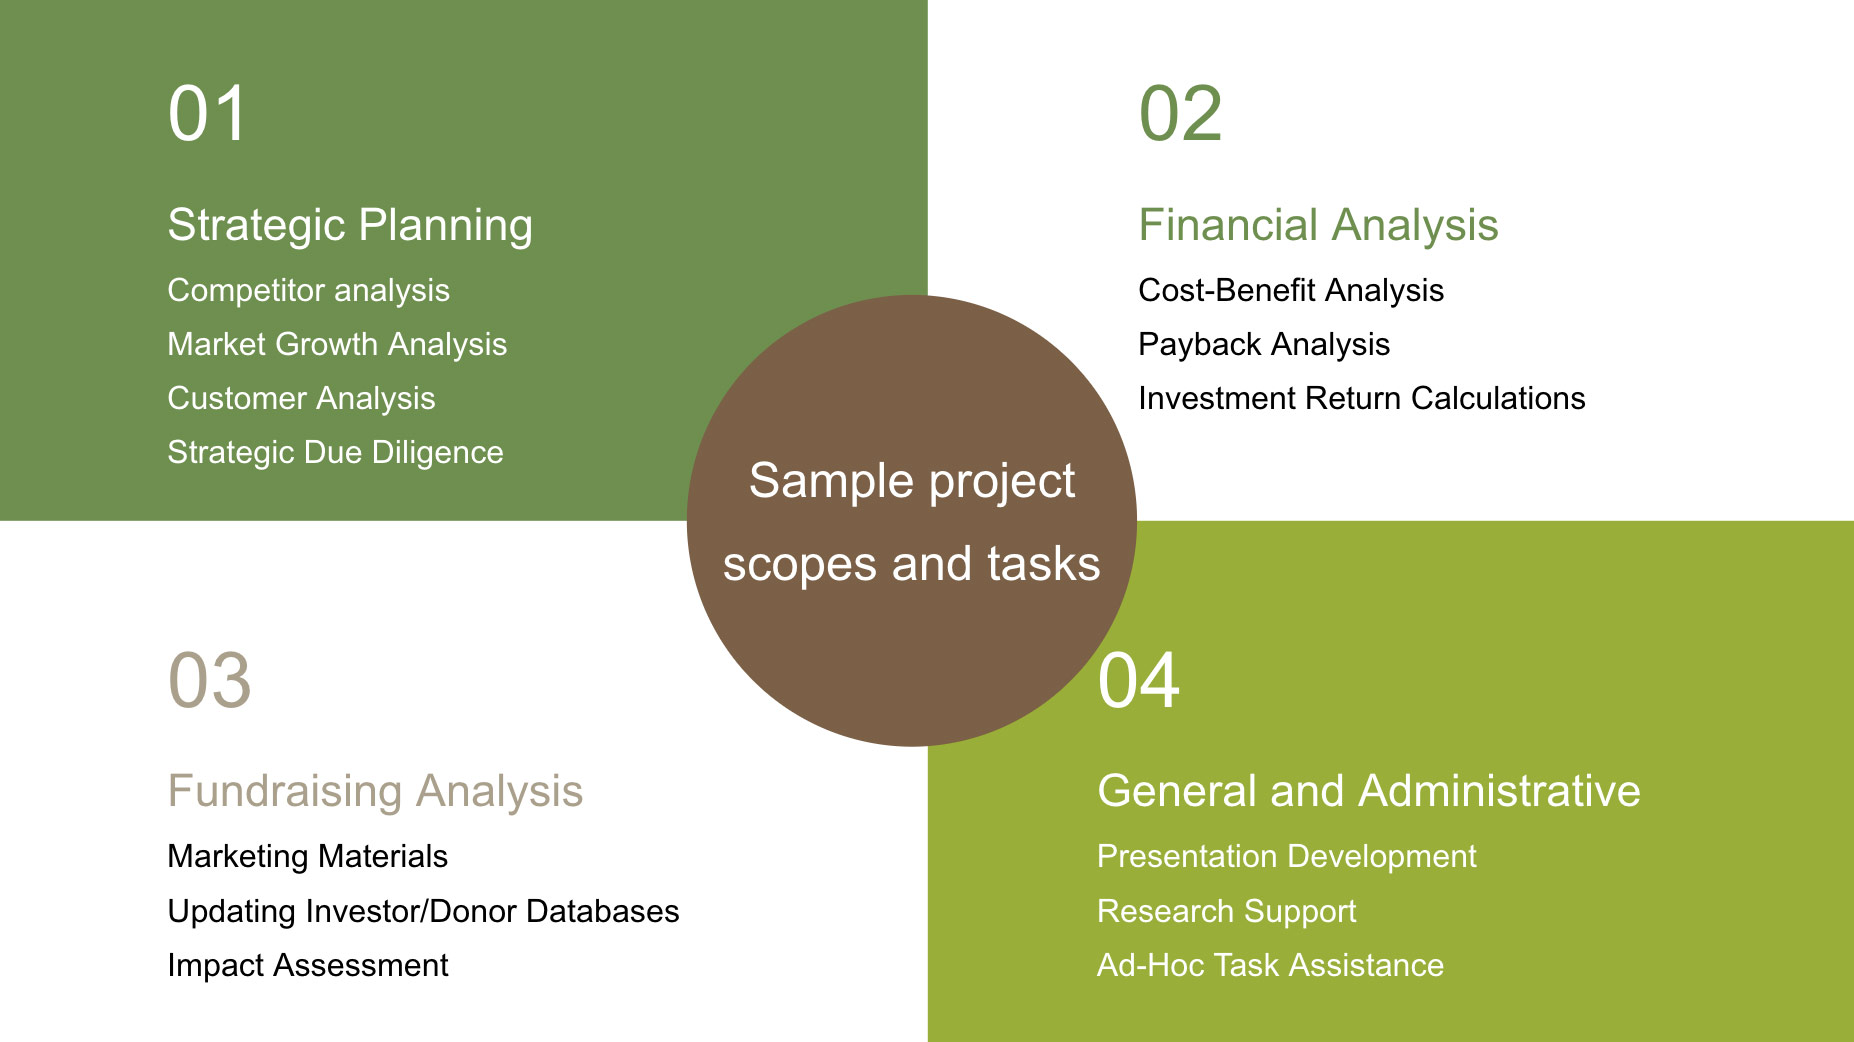 Sample project scopes and tasks graphic